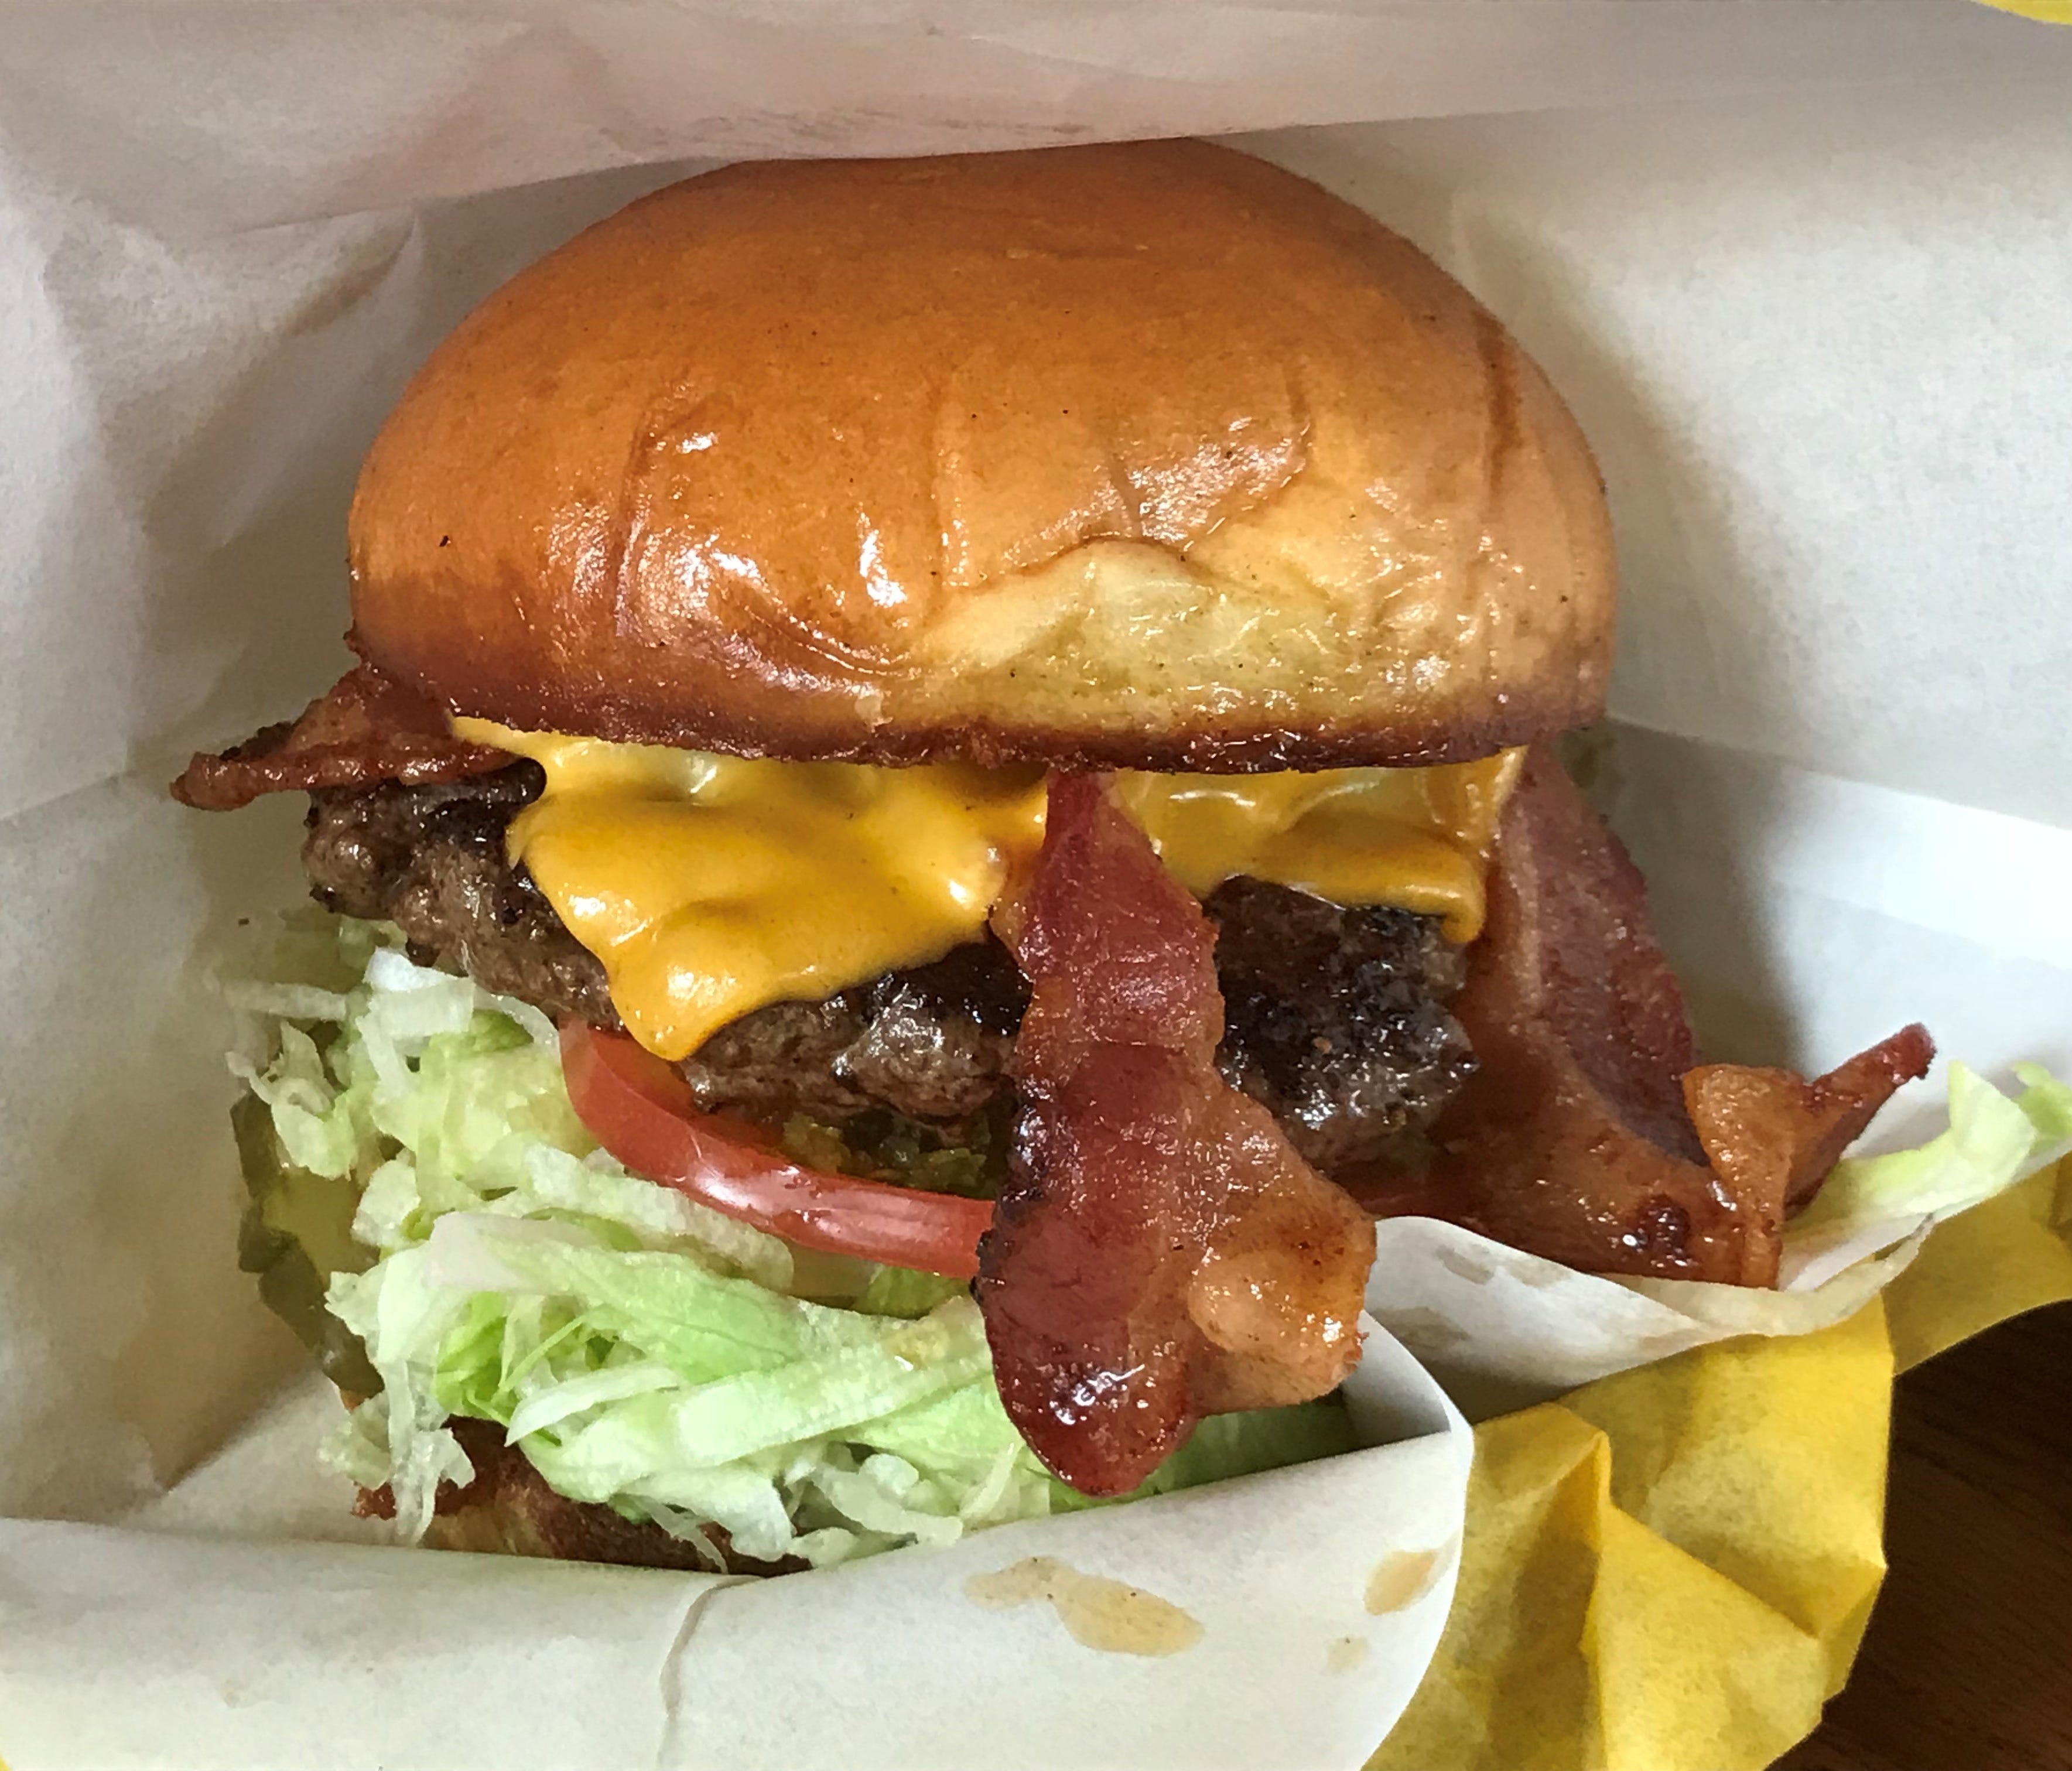 The basic bacon cheeseburger is served on a Village Baking Company roll.